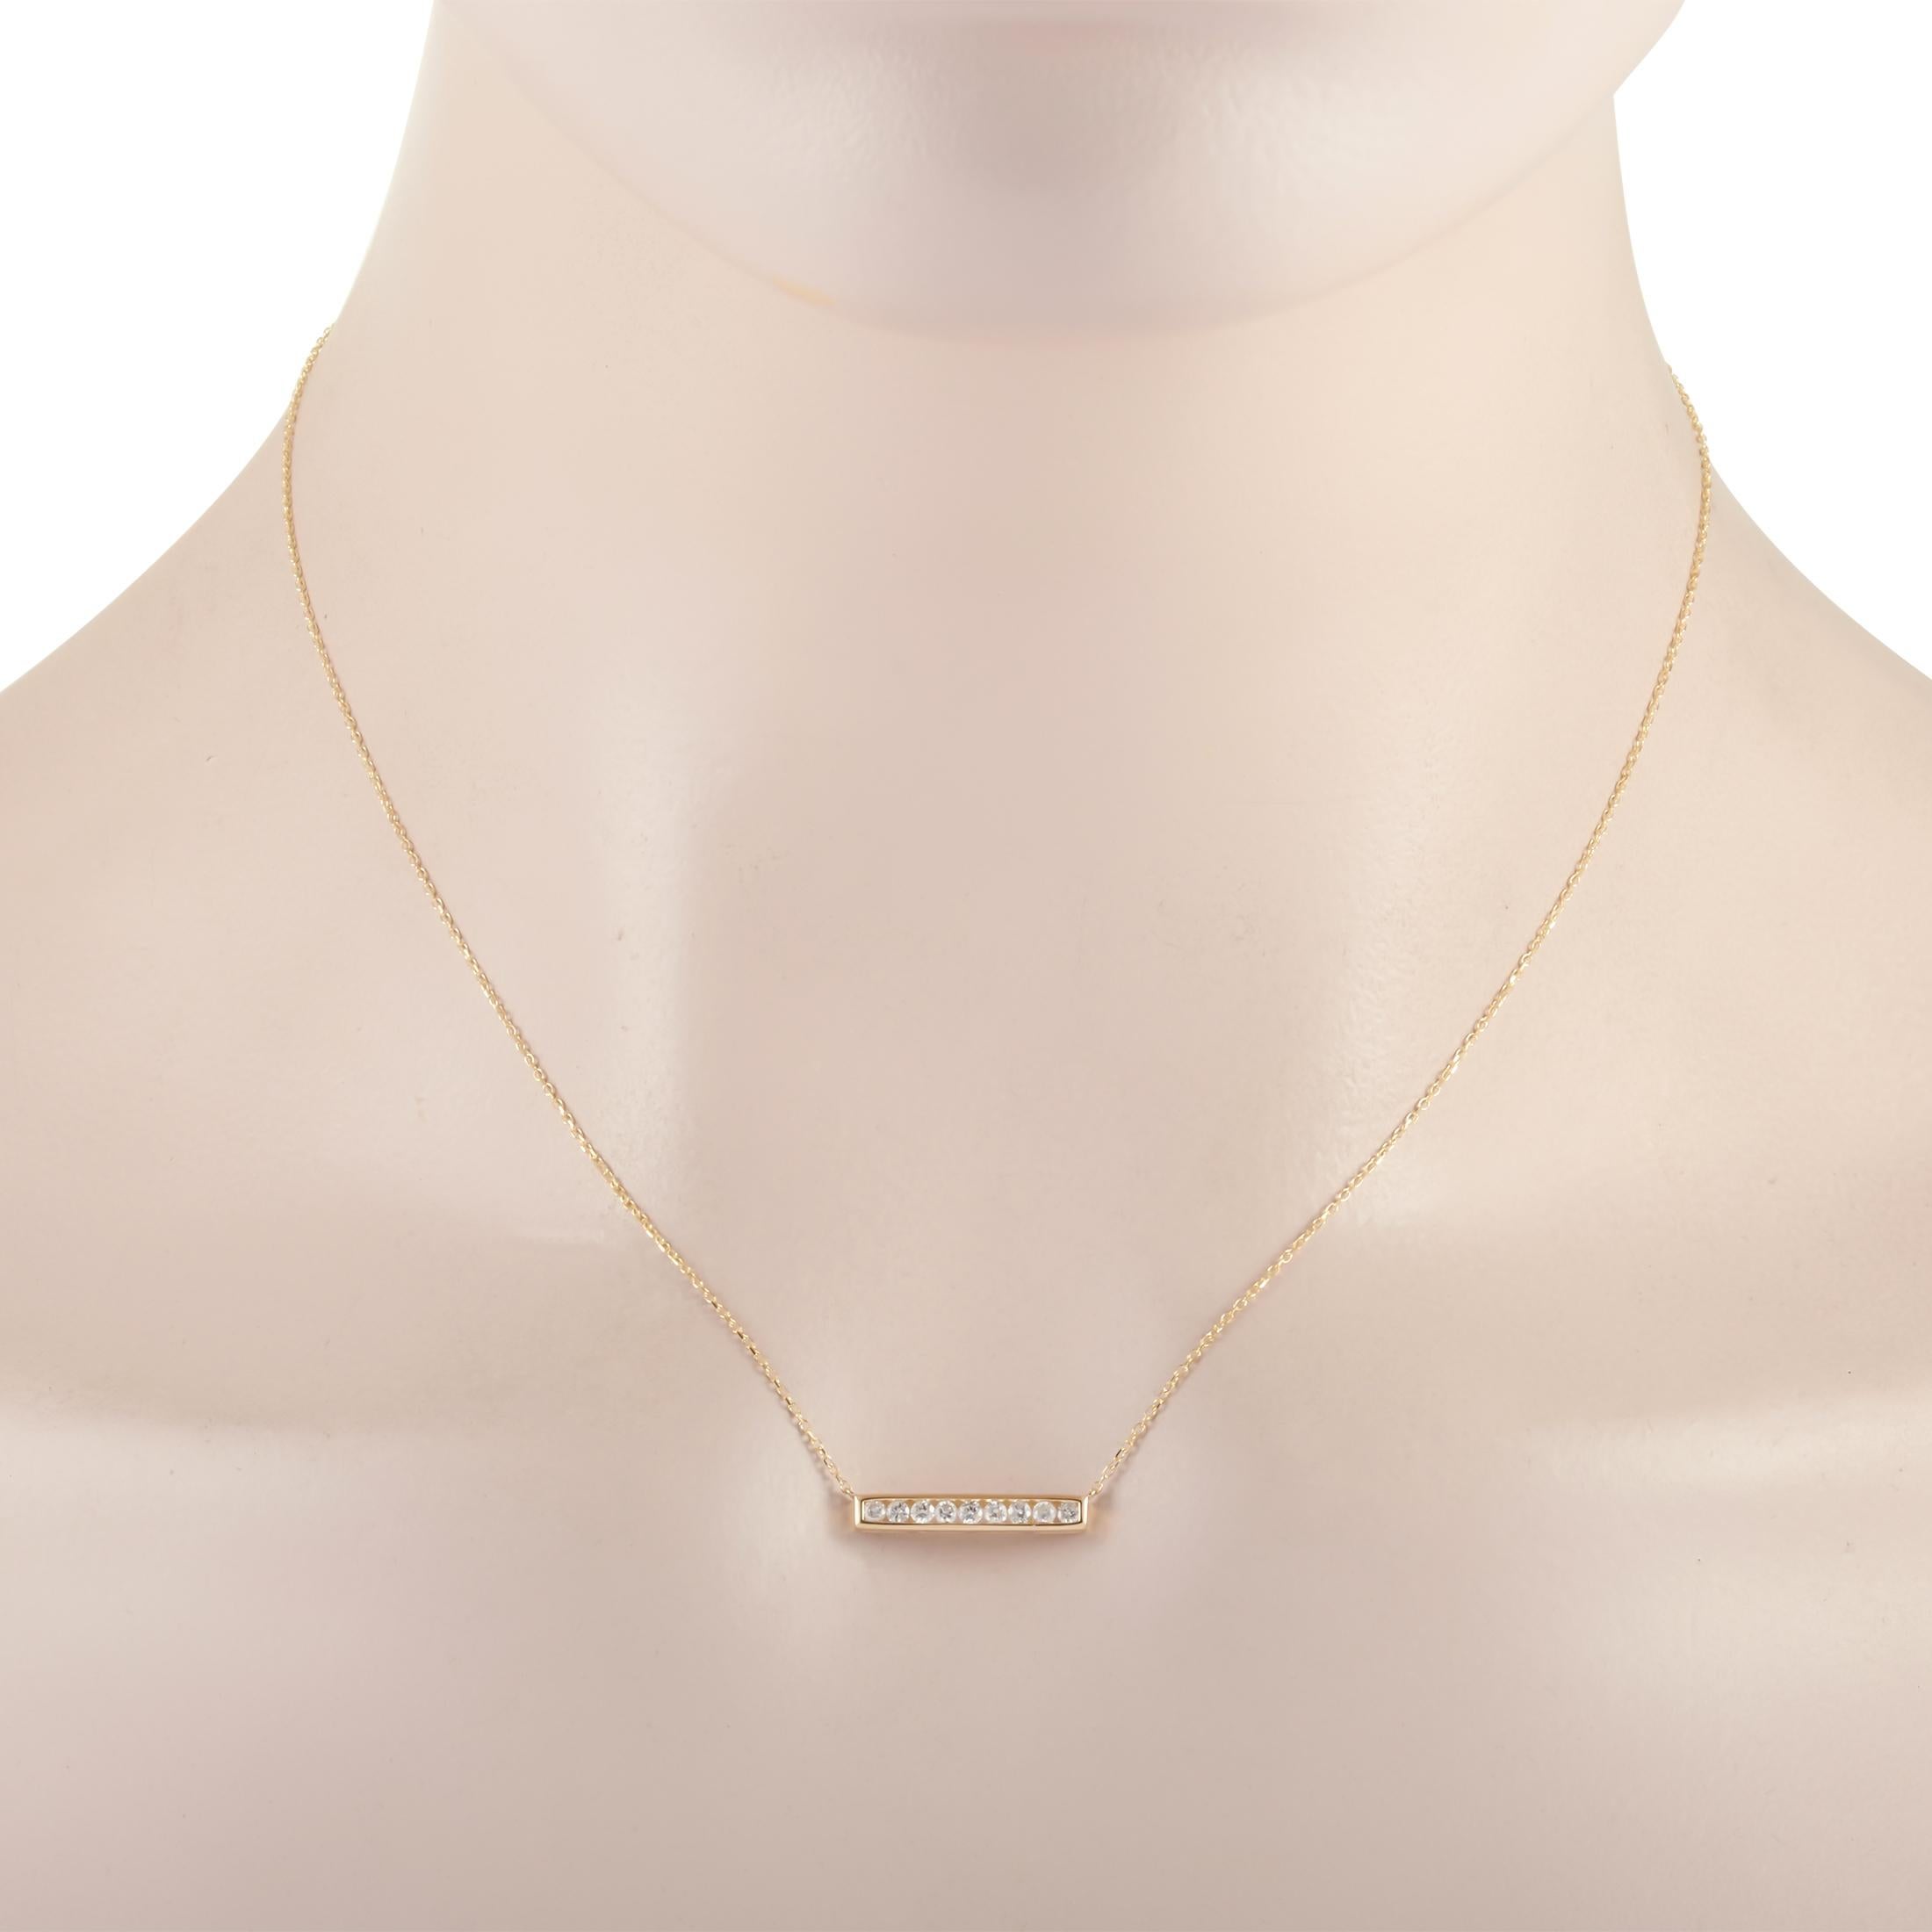 This LB Exclusive necklace is made of 14K yellow gold and embellished with diamonds that amount to 0.25 carats. The necklace weighs 1.8 grams and boasts a 15” chain and a pendant that measures 0.13” in length and 0.75” in width.
 
 Offered in brand